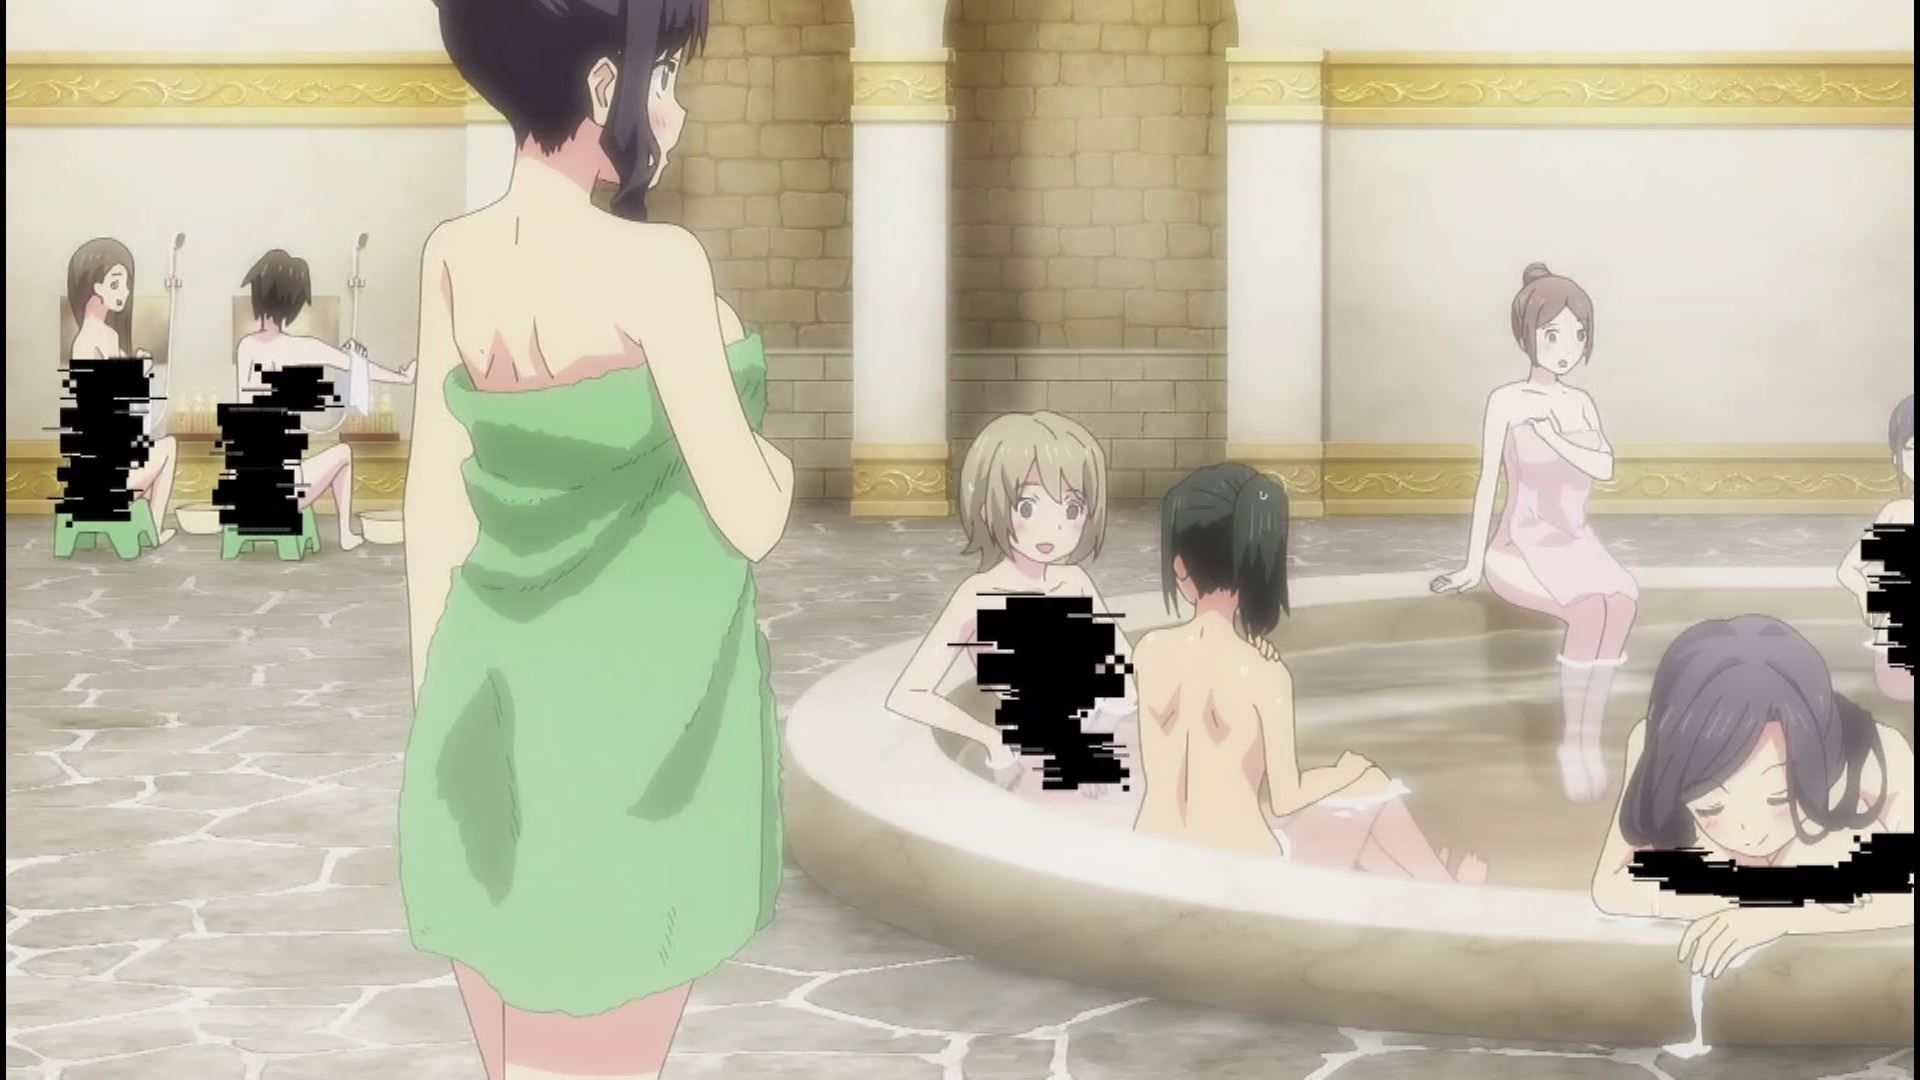 In the anime "Doomsday Harlem" episode 1, there is a scene where a girl and a girl are on the verge of being naked in a world of only men and nakedness 23